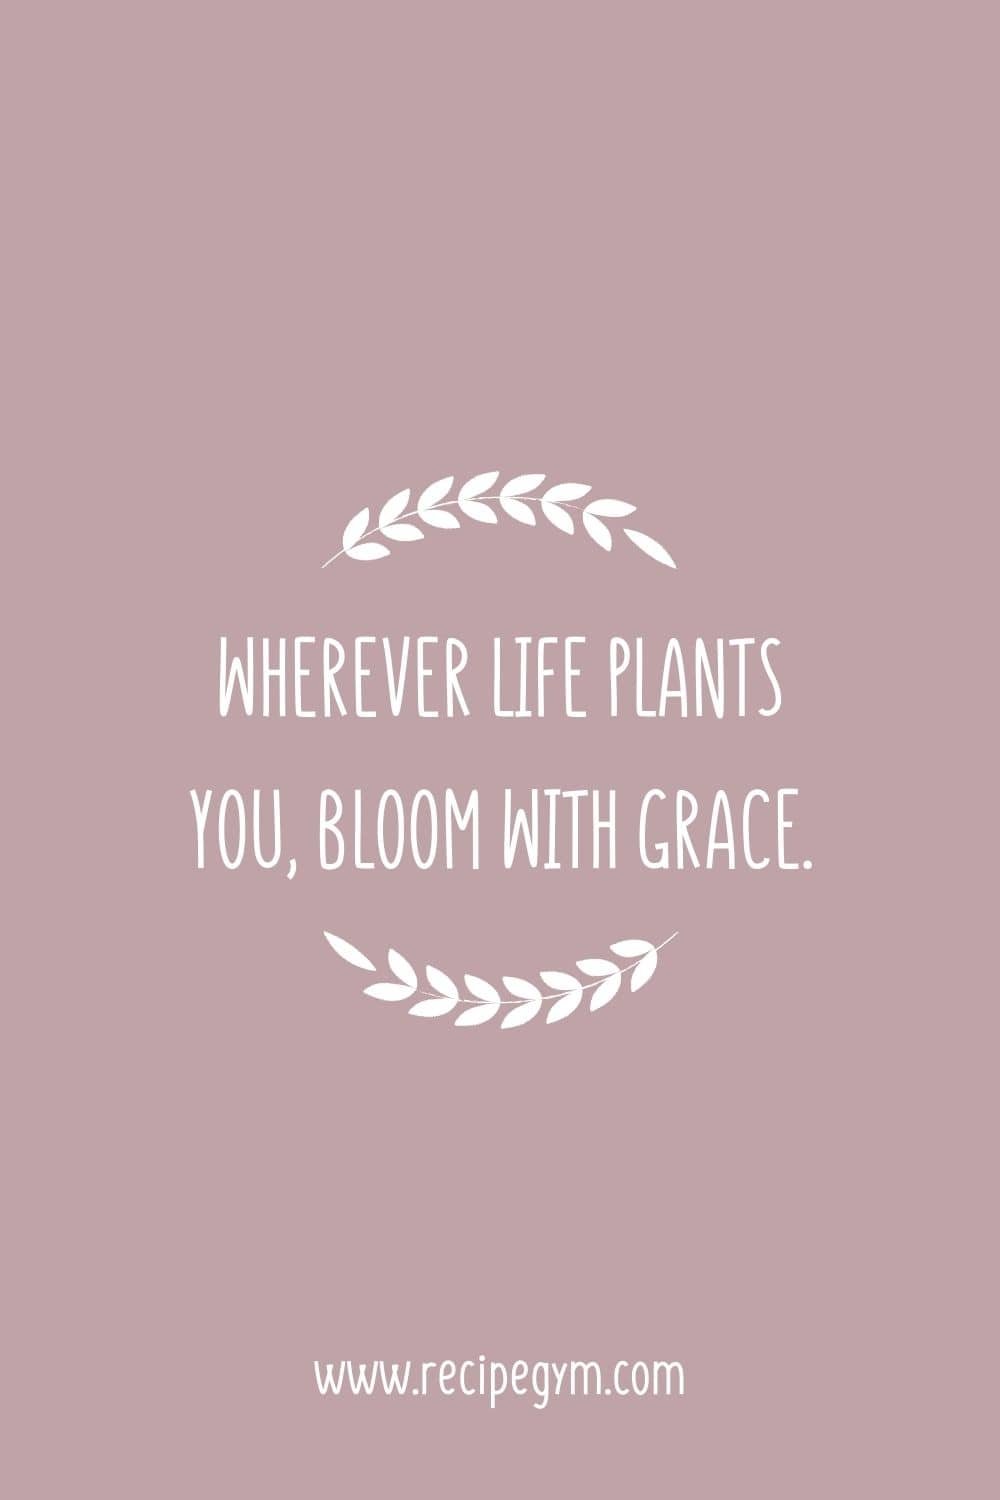 3L Wherever life plants you bloom with grace